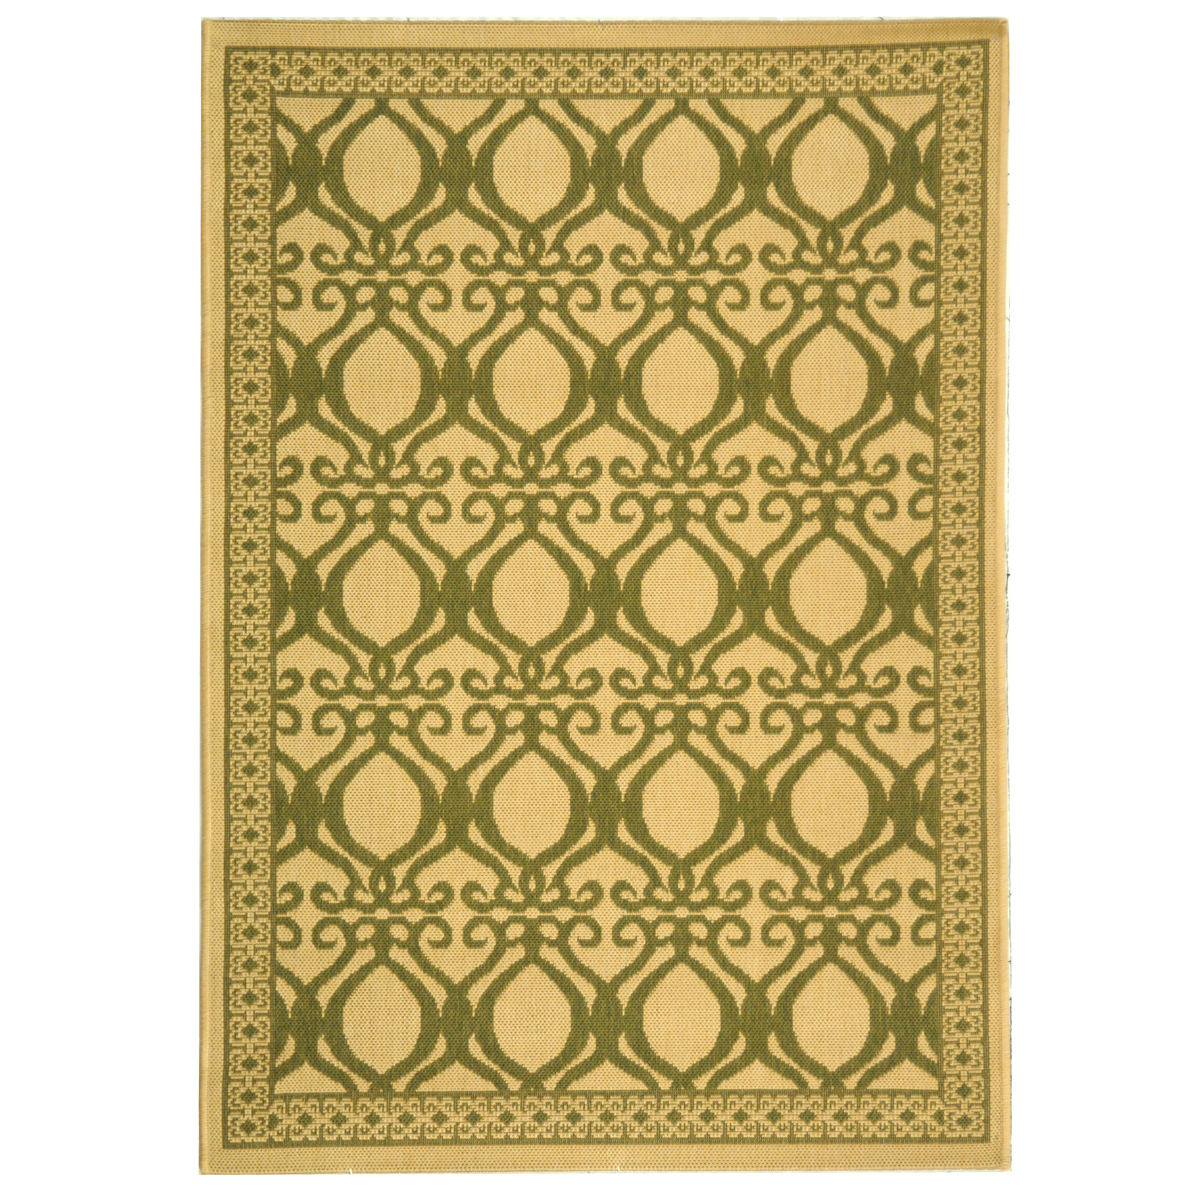 SAFAVIEH Outdoor CY3040-1E01 Courtyard Natural / Olive Rug - 4' X 5' 7